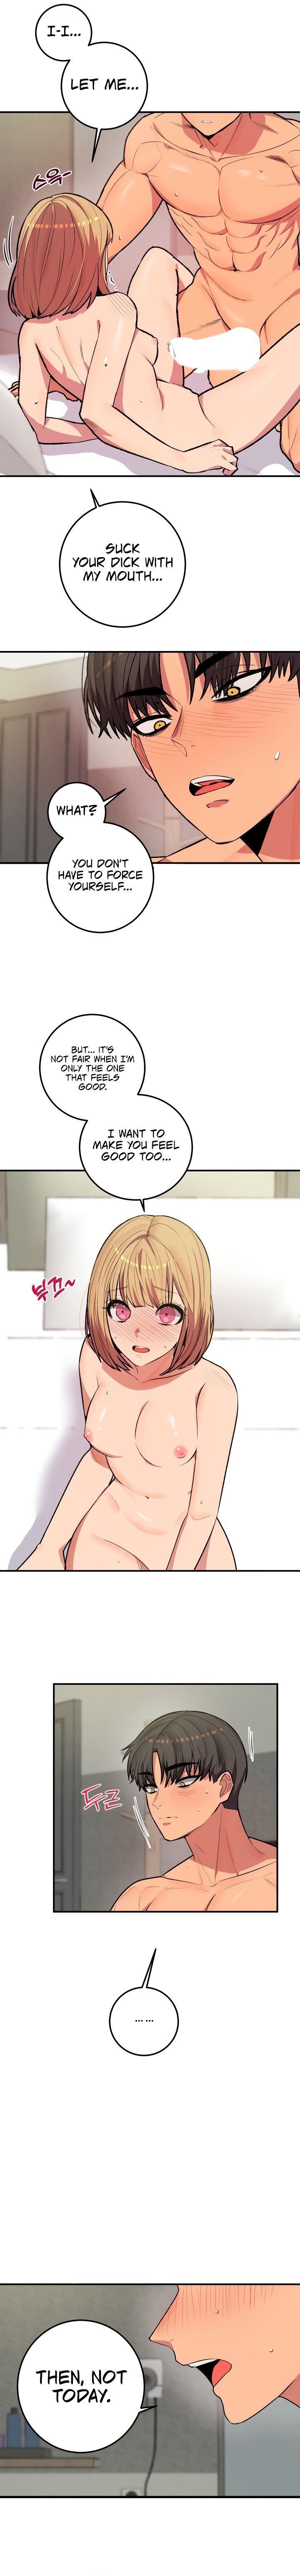 [Dating Sim Short Story] The Dating Simulator Cheat Code - Chapter 4 Page 7